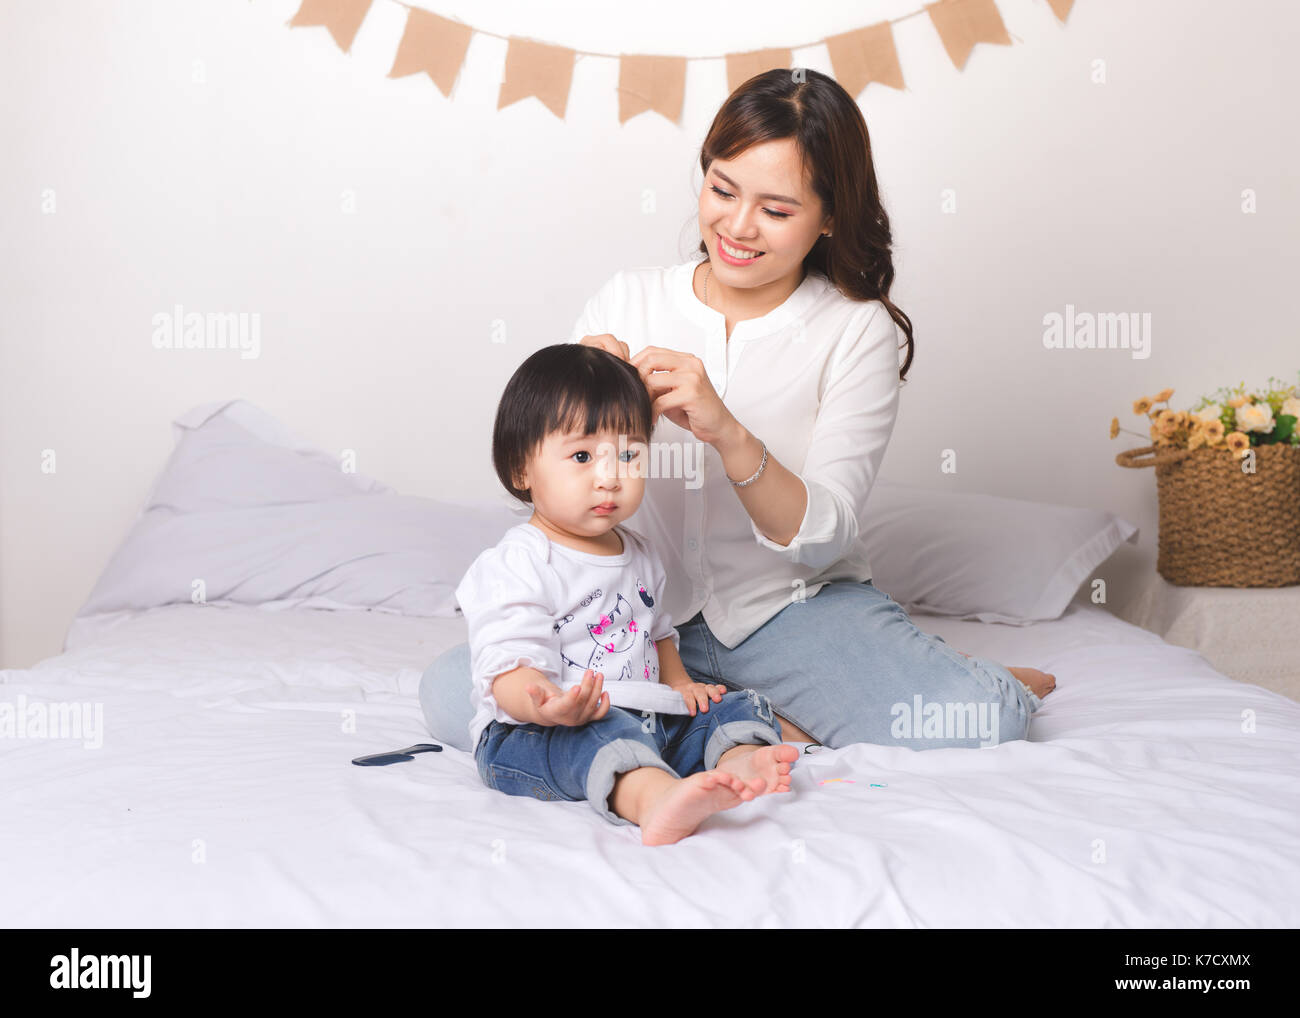 Happy loving family. Mom and child girl are having fun on the bed. Stock Photo